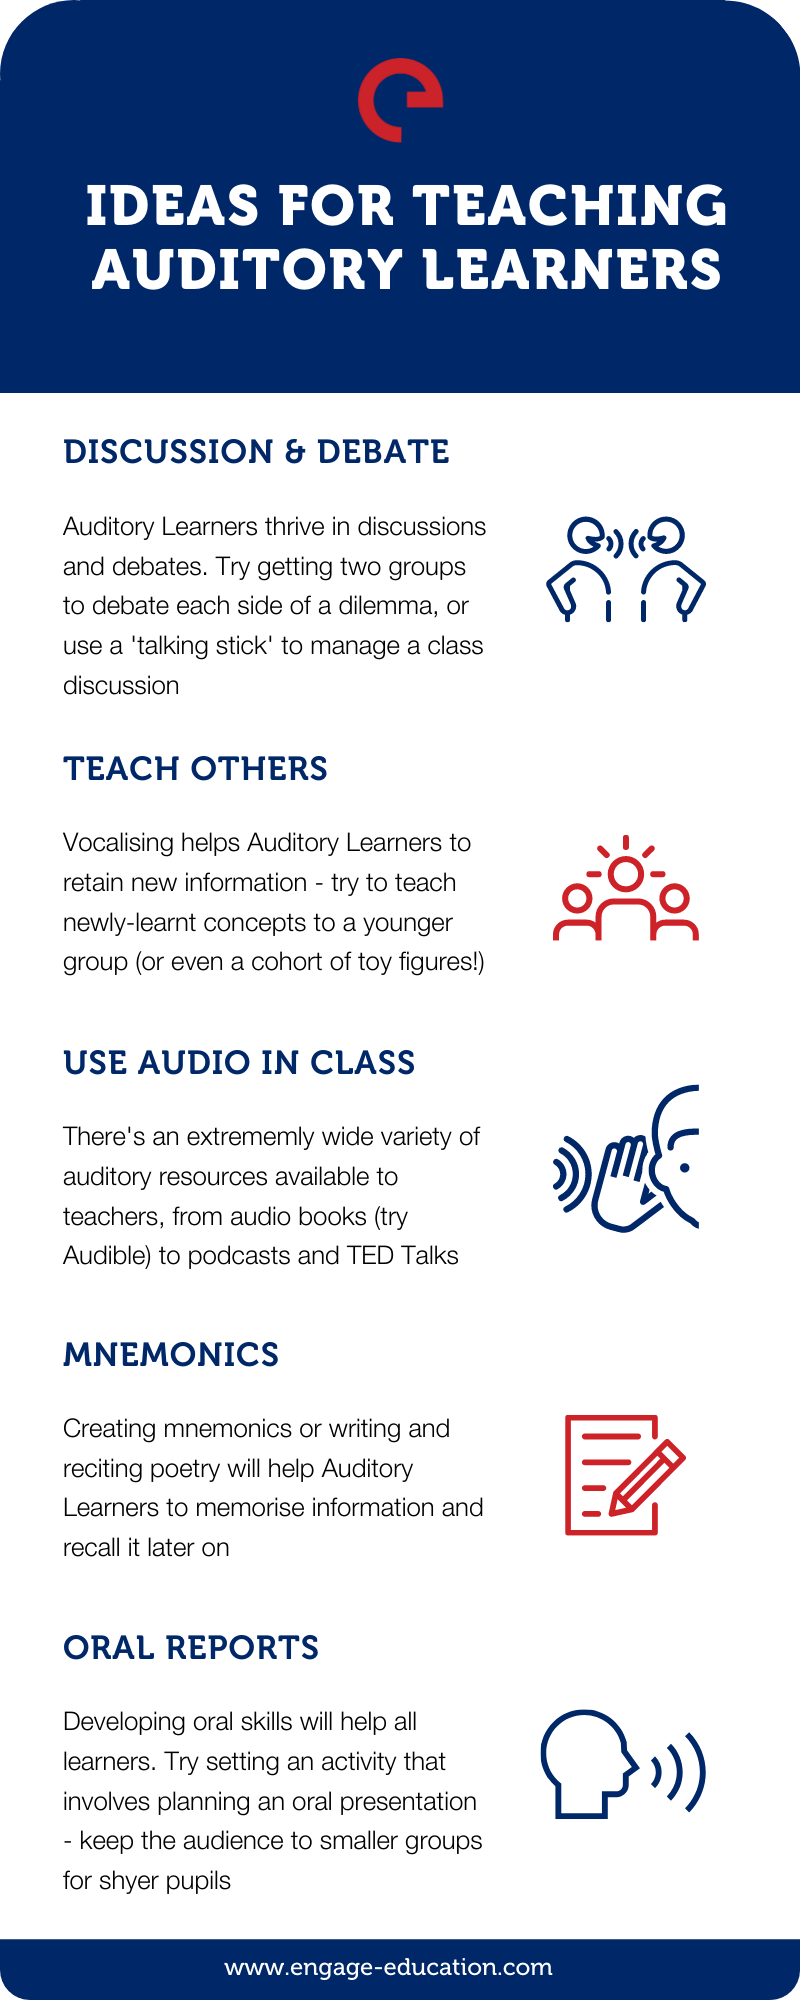 auditory learning need tolearn